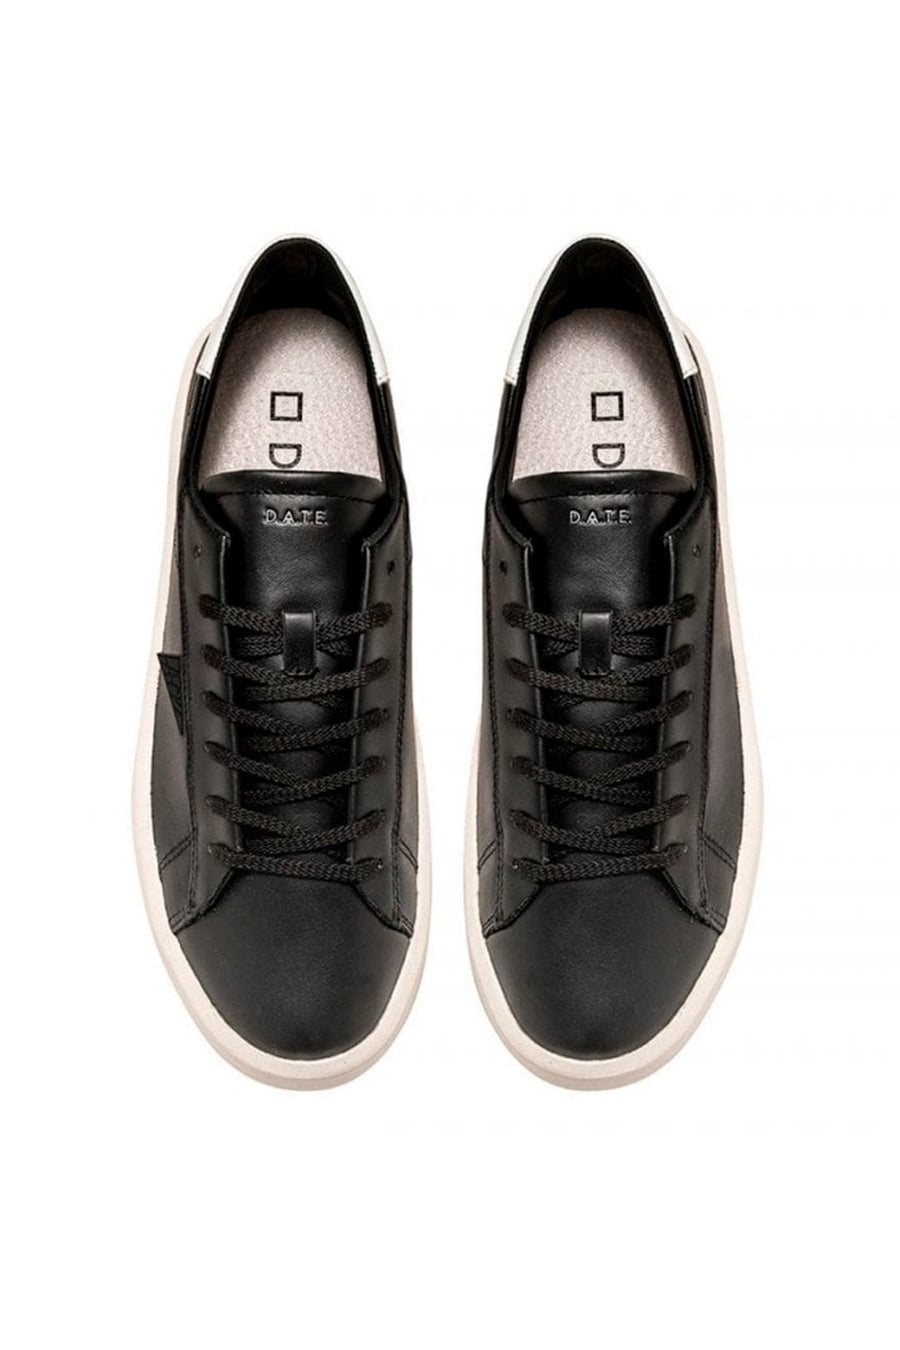 Buy the D.A.T.E. ACE Mono Sneaker in Black at Intro. Spend £50 for free UK delivery. Official stockists. We ship worldwide.